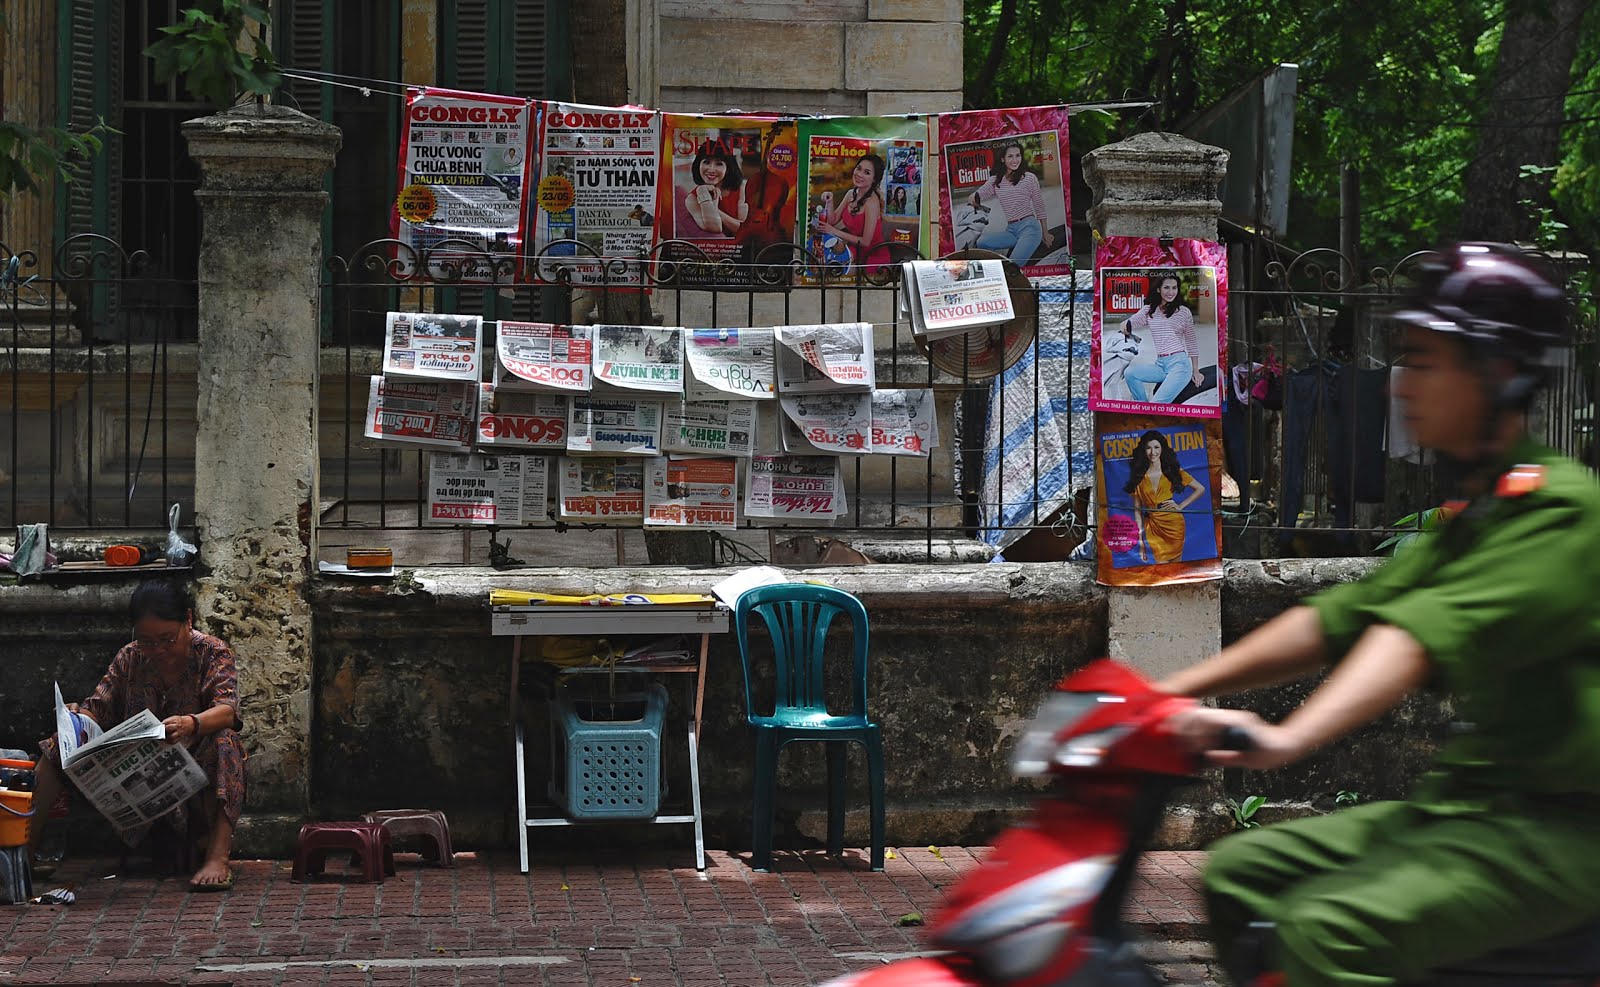 Reporters Without Borders labels Vietnam, Philippines worst for spreading disinformation